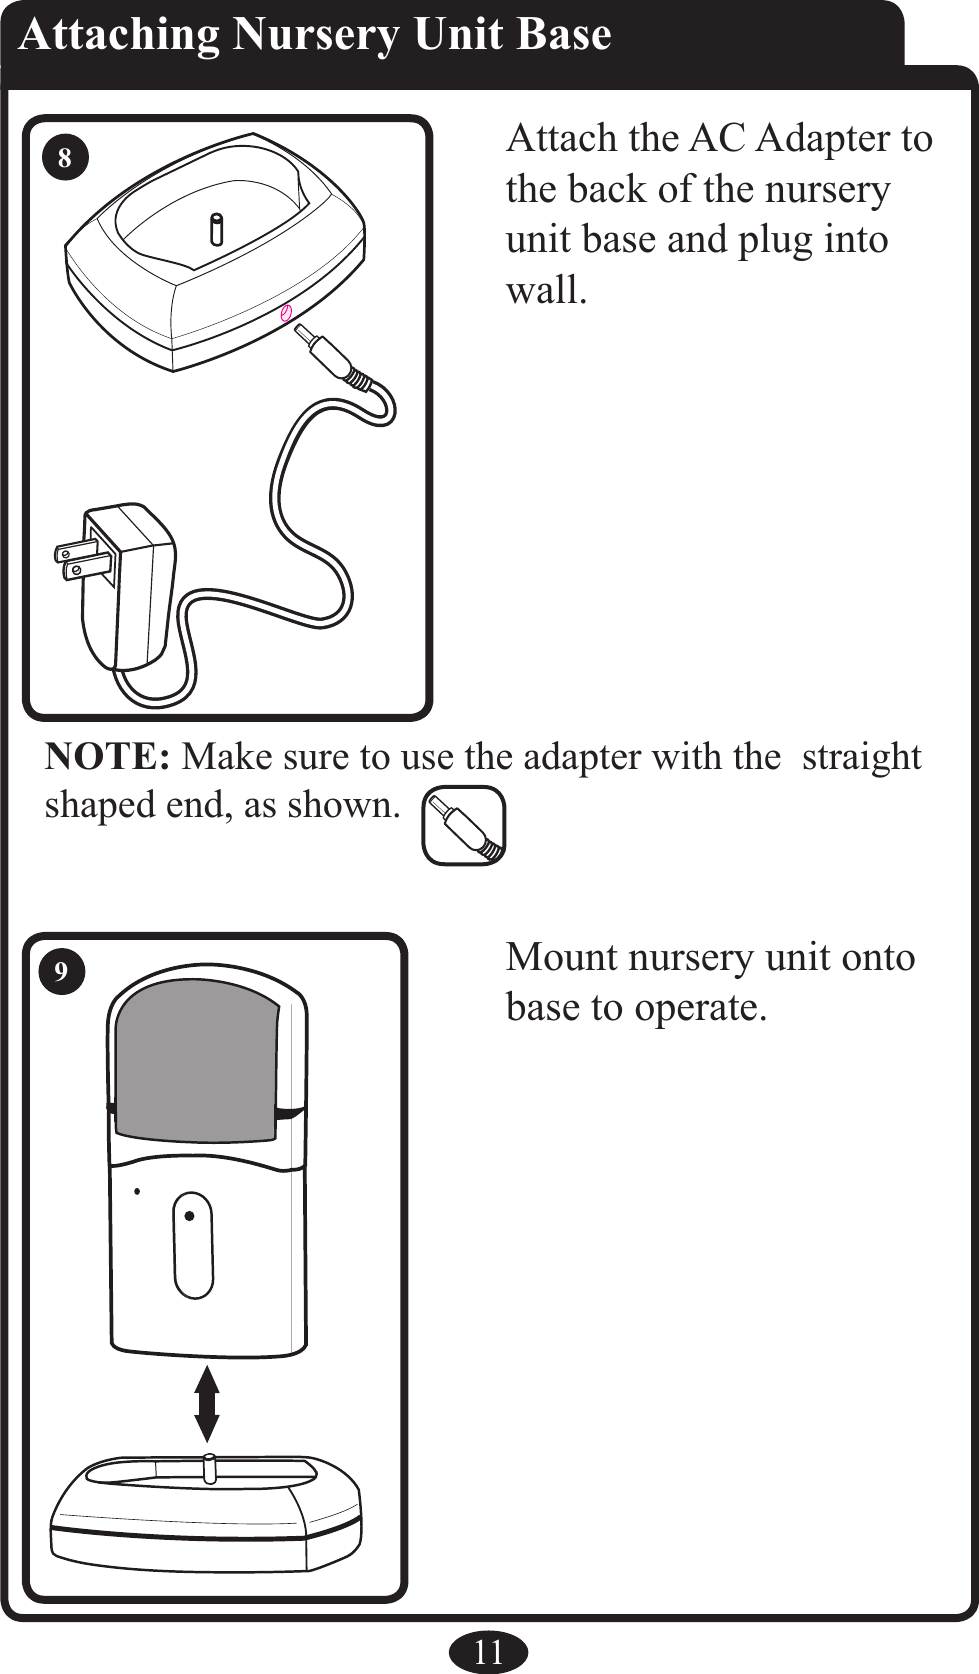 NOTE: Make sure to use the adapter with the  straight shaped end, as shown.11Attaching Nursery Unit BaseAttach the AC Adapter to the back of the nursery unit base and plug into wall.Mount nursery unit onto base to operate.89